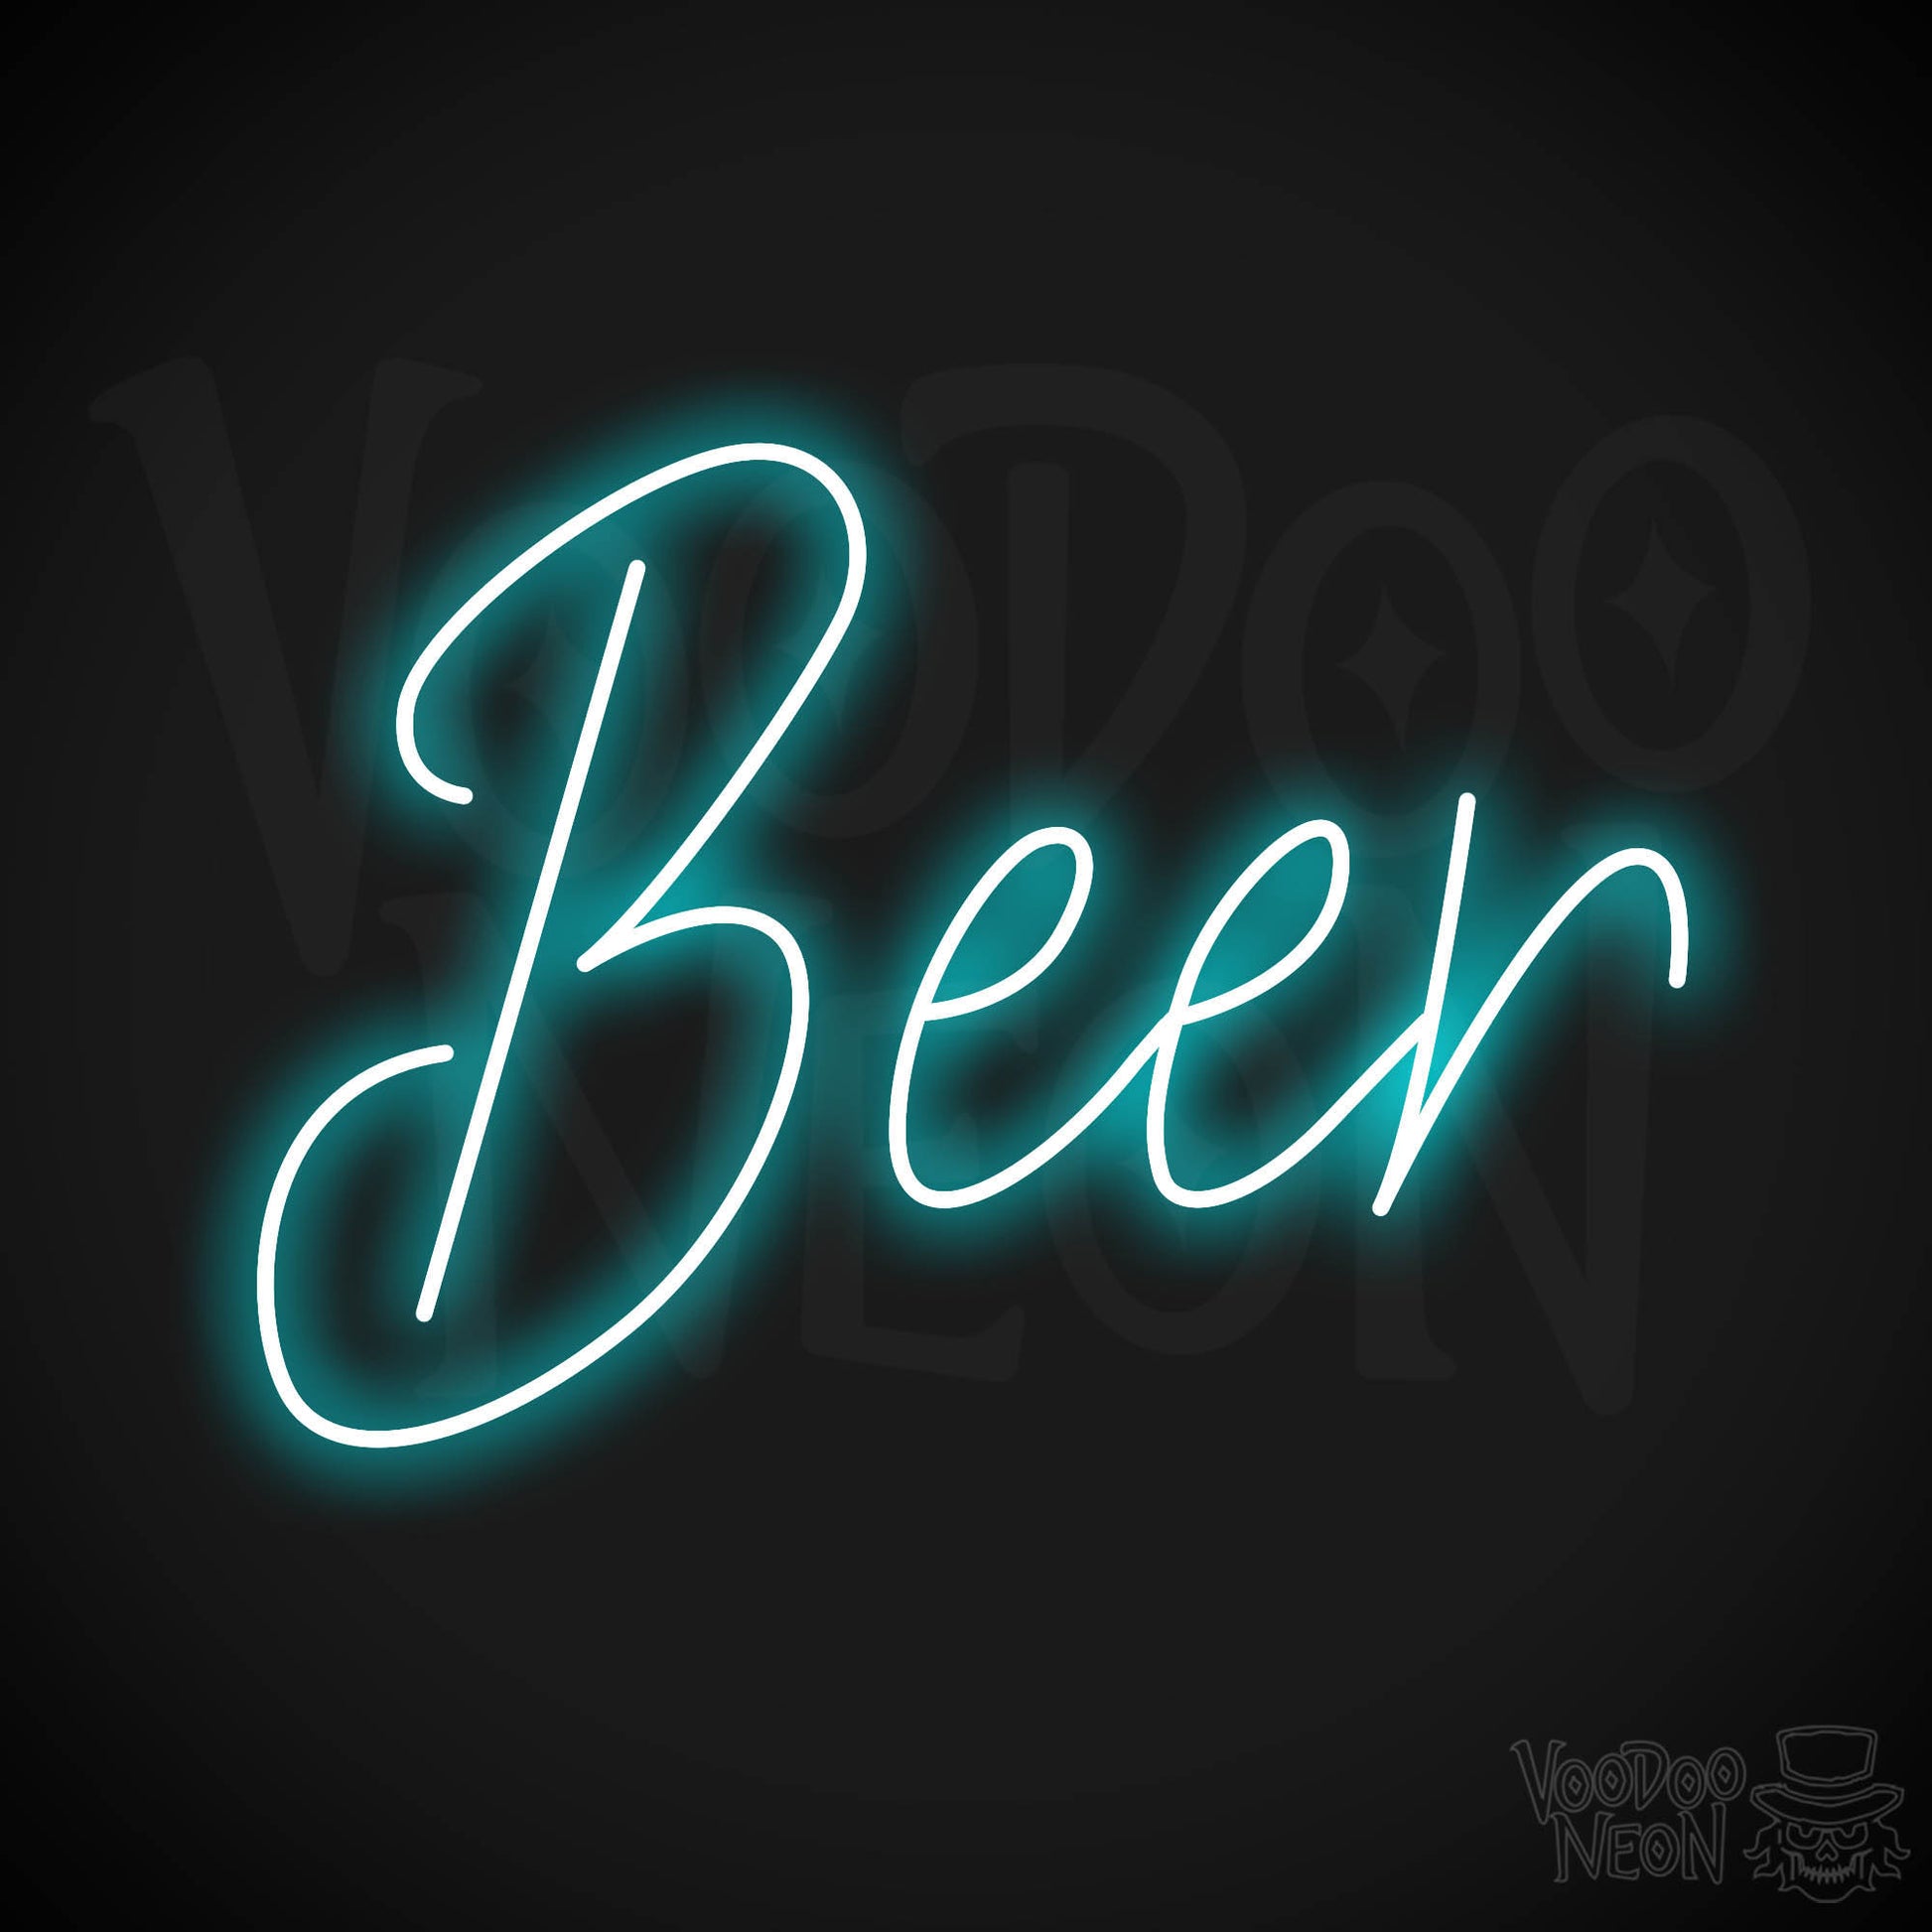 Beer LED Neon - Ice Blue